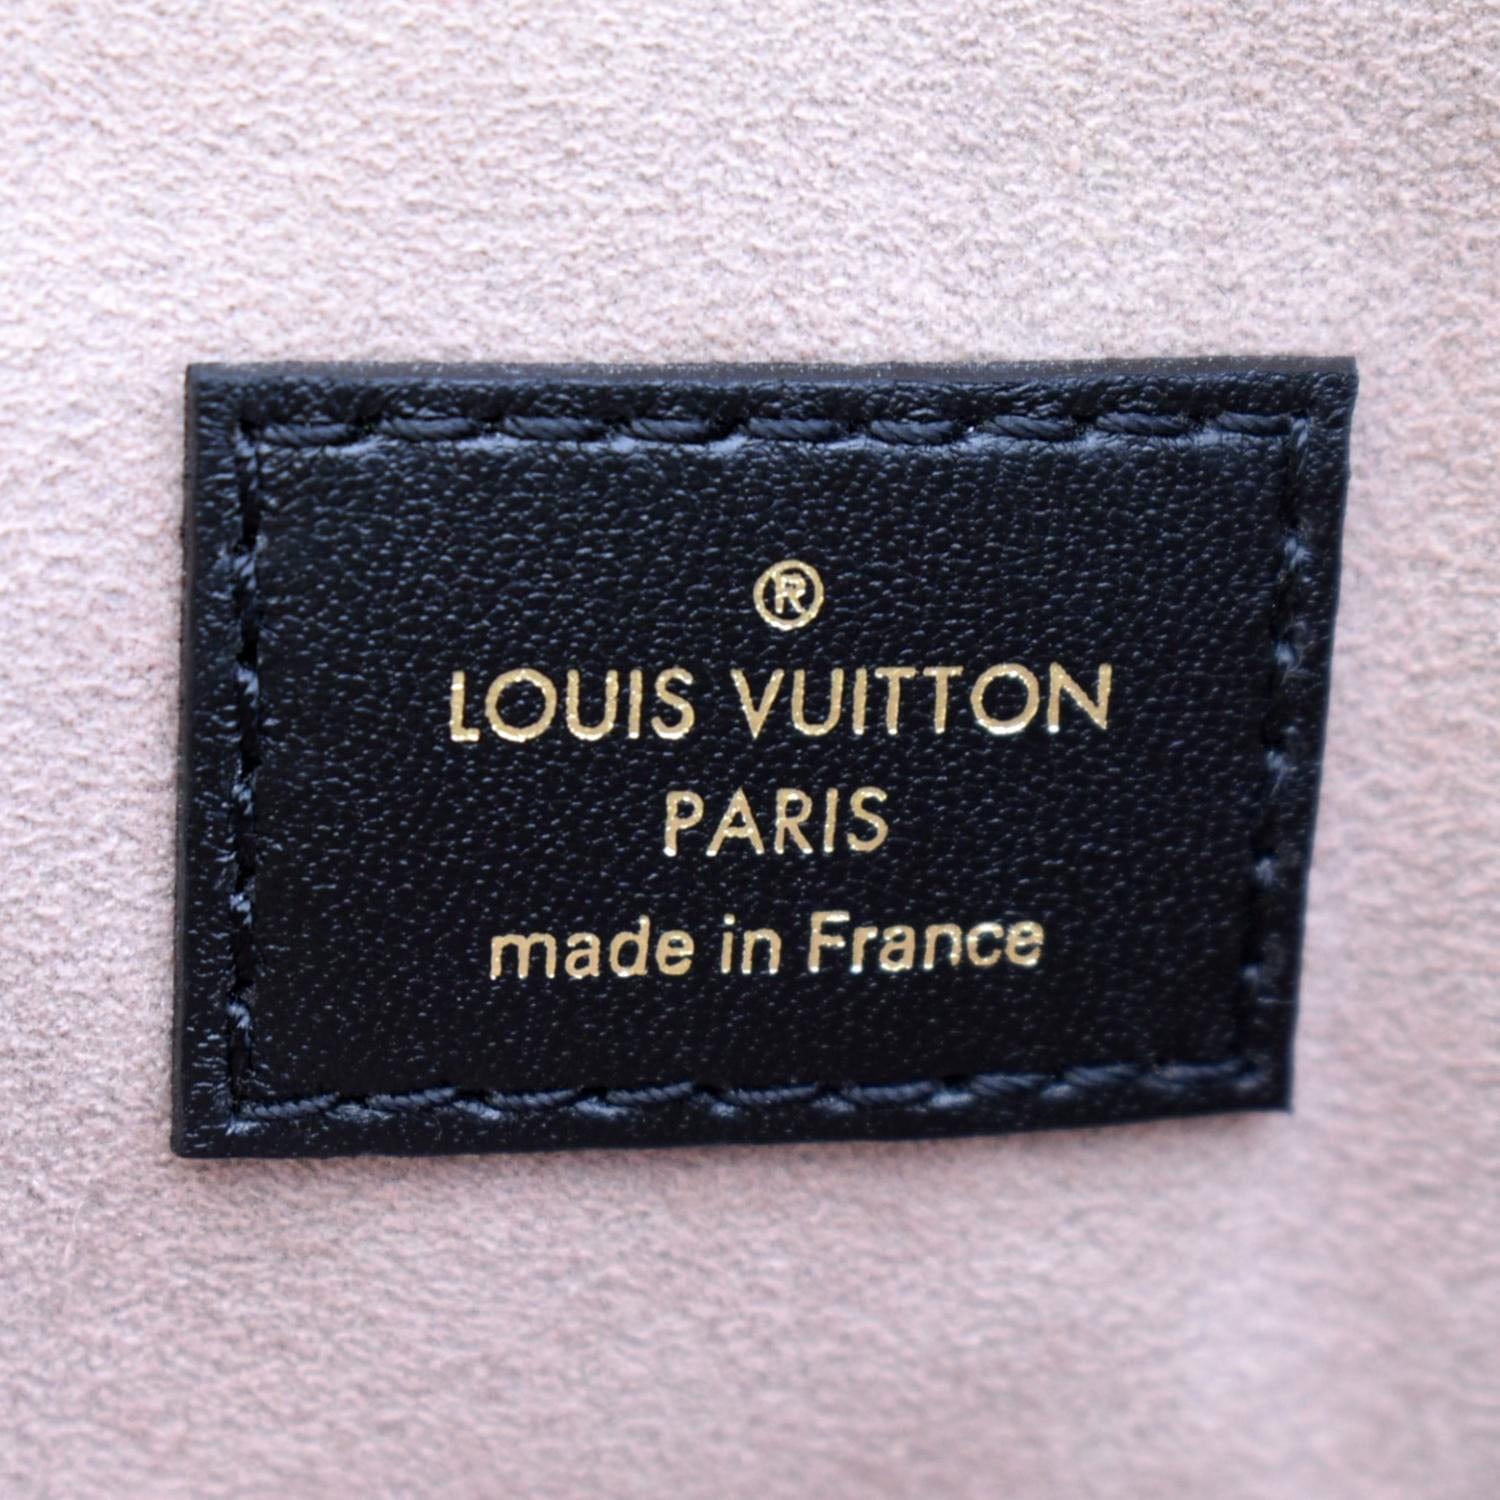 Louis Vuitton Coussin PM Handbag Colorful Monogram Embossed Puffed She -  Praise To Heaven